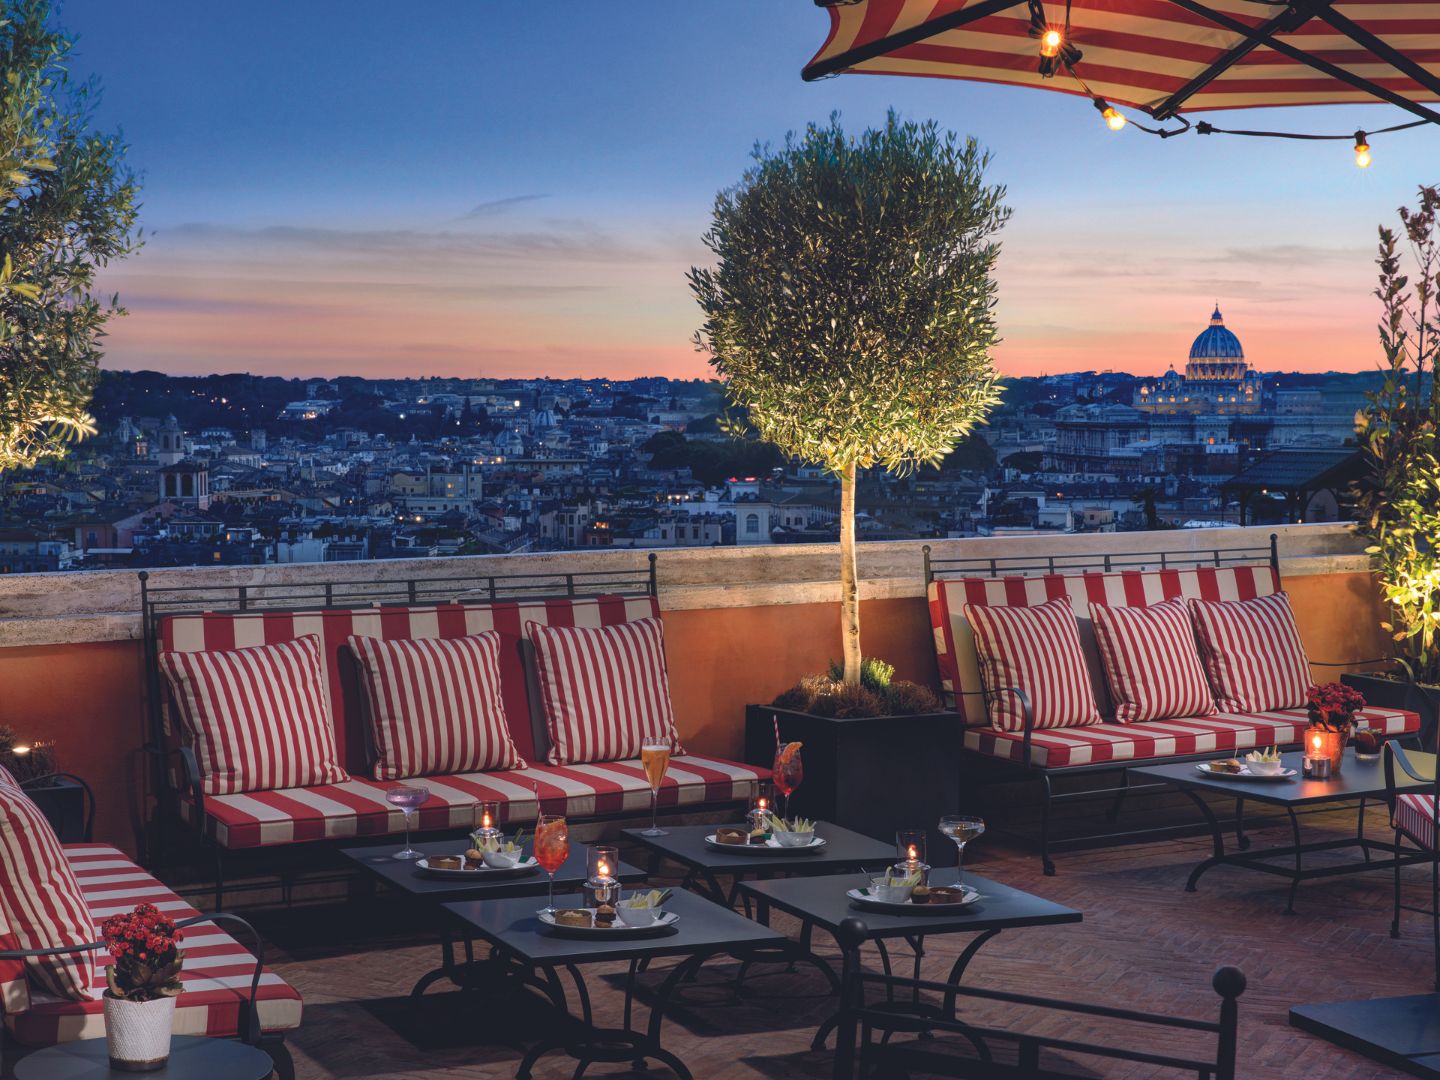 Stay at Rocco Forte Hotels and earn Volare points